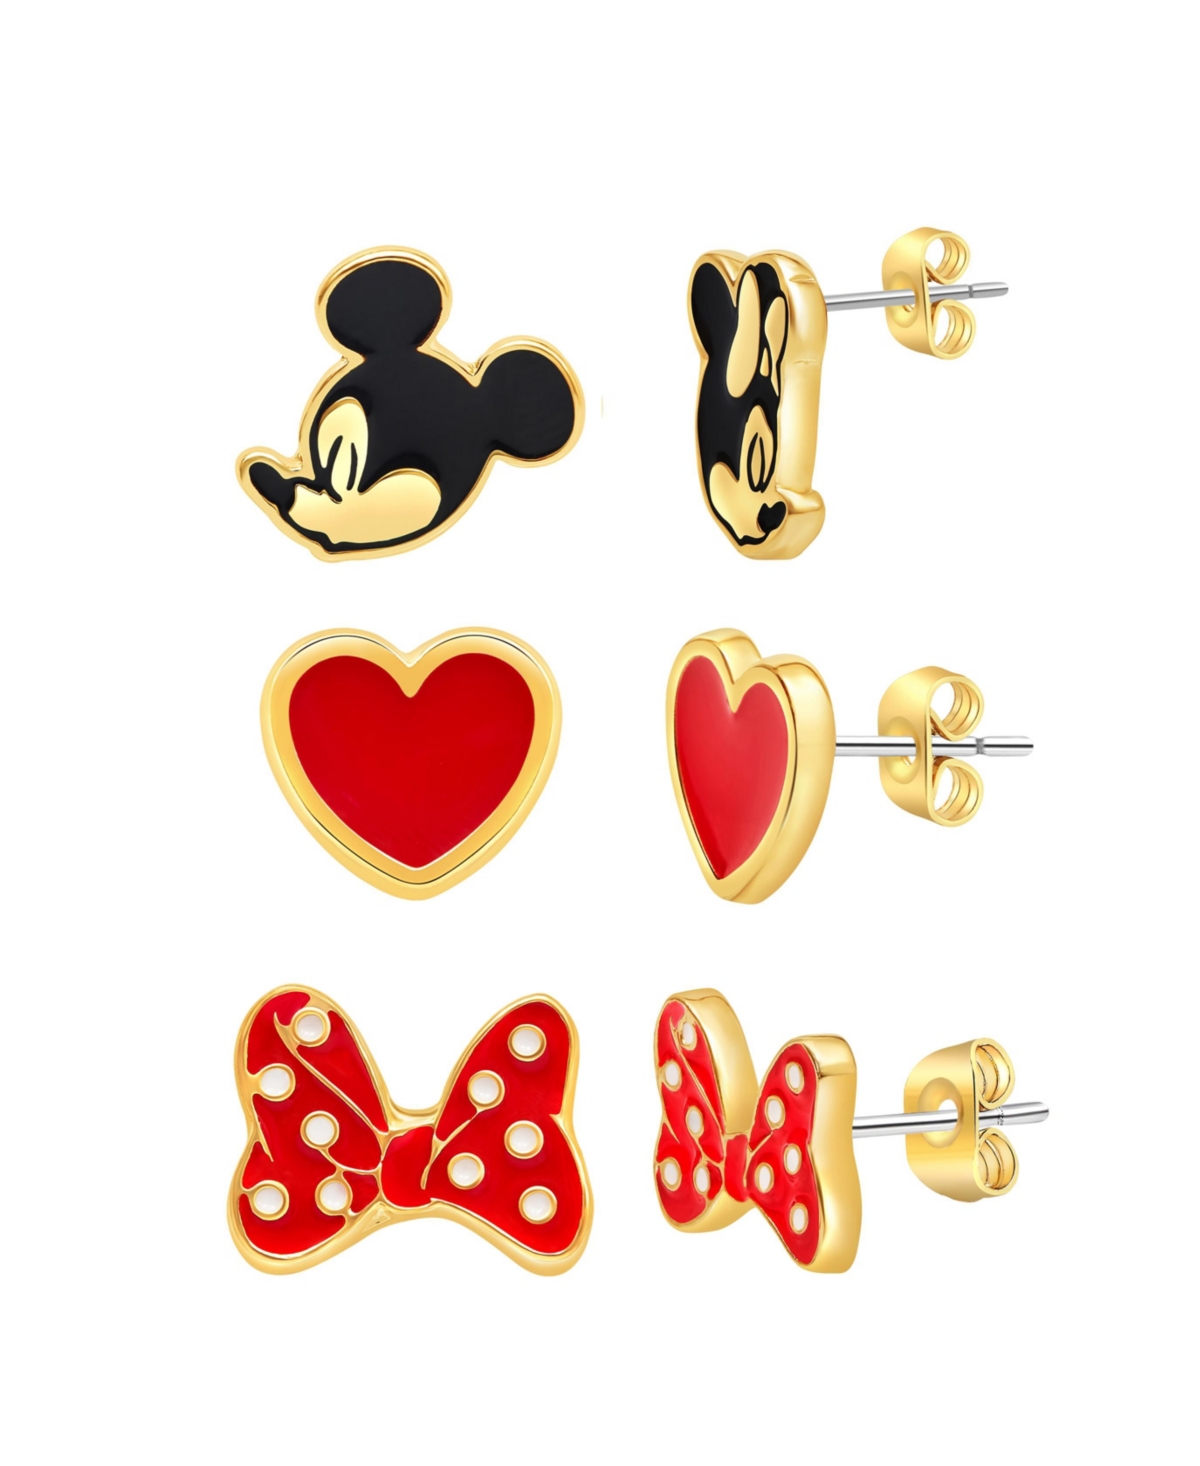 Mickey and Minnie Mouse Fashion Stud Earring - Mismatch Kiss, Black/Red - 3 pairs - Black, red